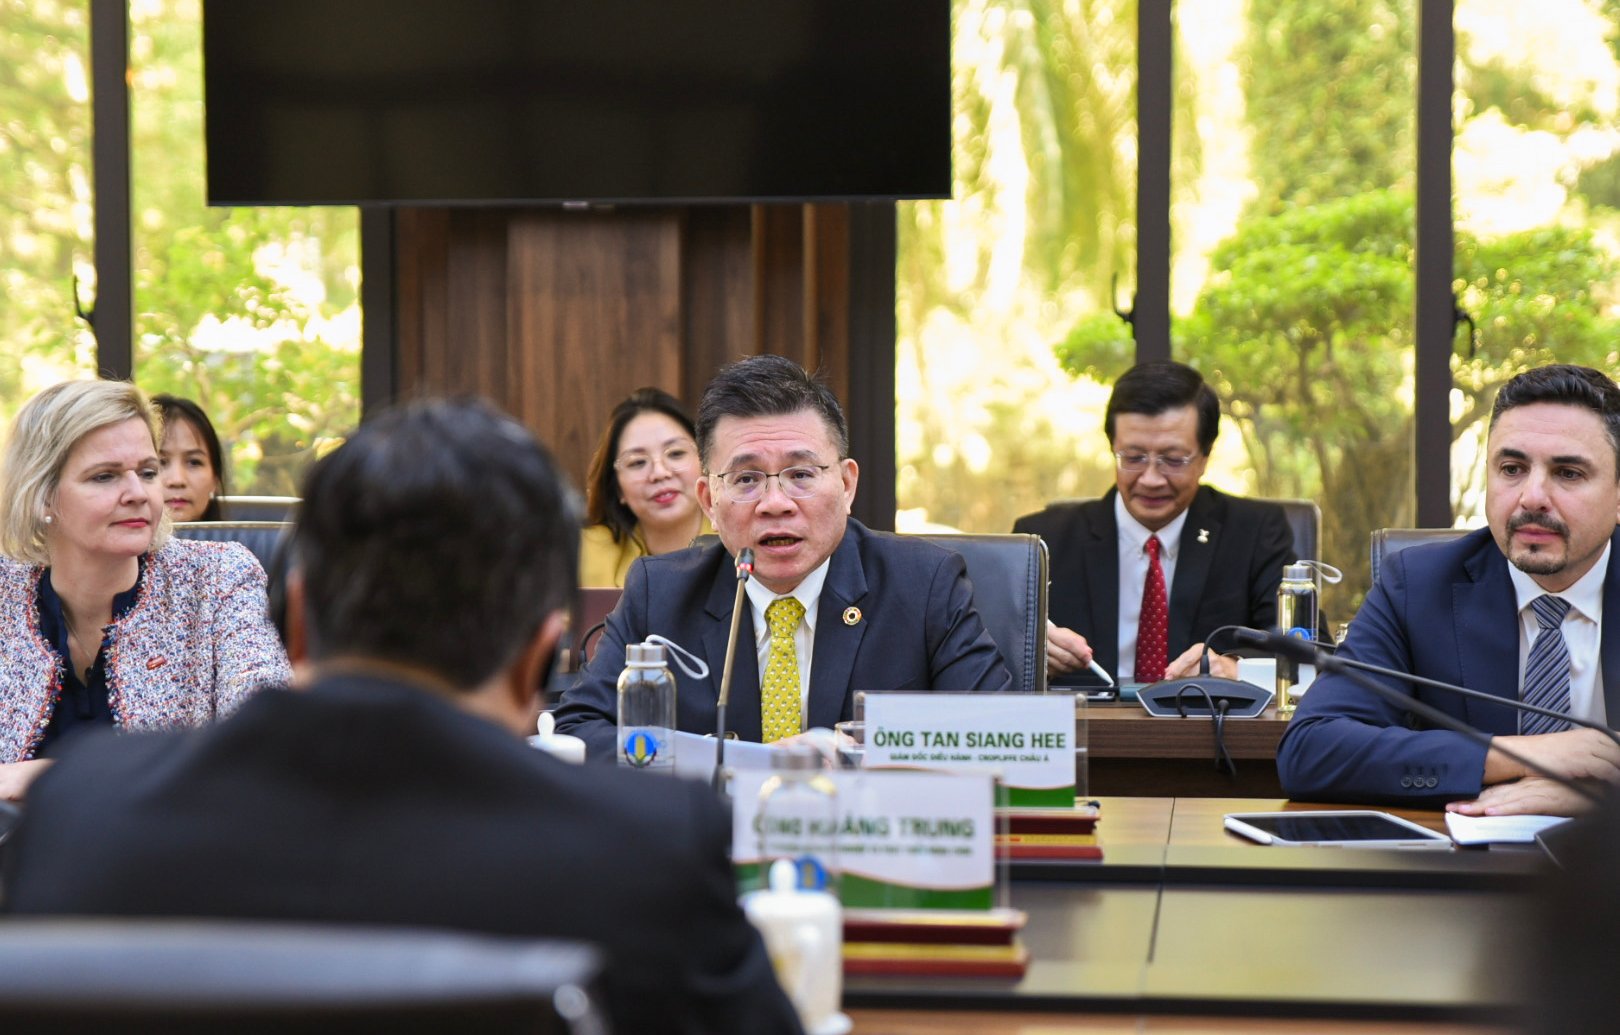 Executive Director of CropLife Asia, Mr. Tan Siang Hee, speaks at the meeting. Photo: Quynh Chi.